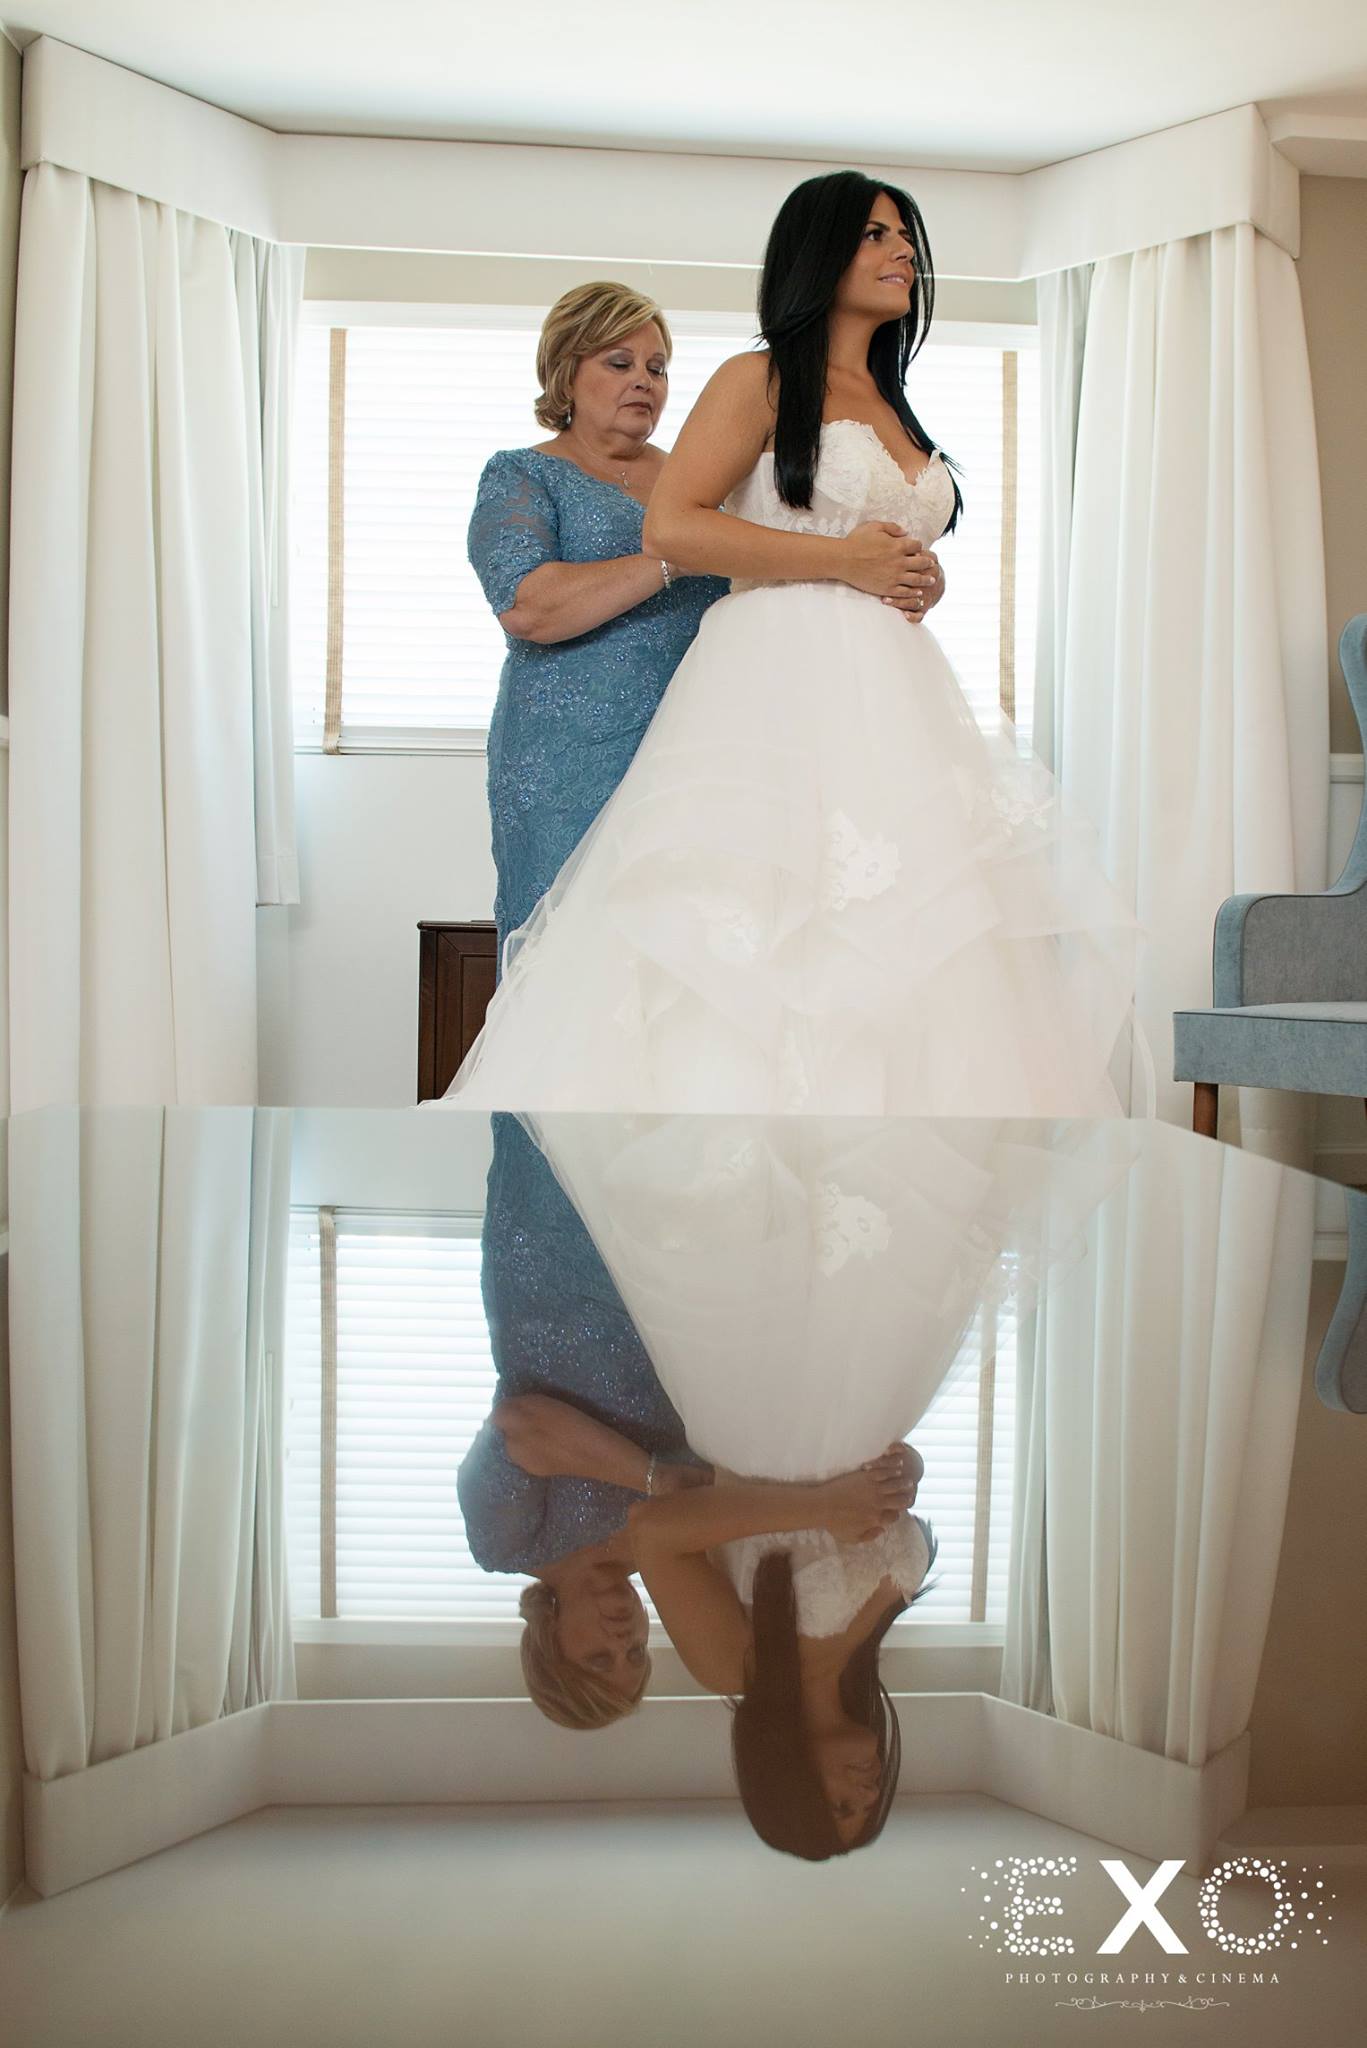 reflective image of bride and mother getting ready